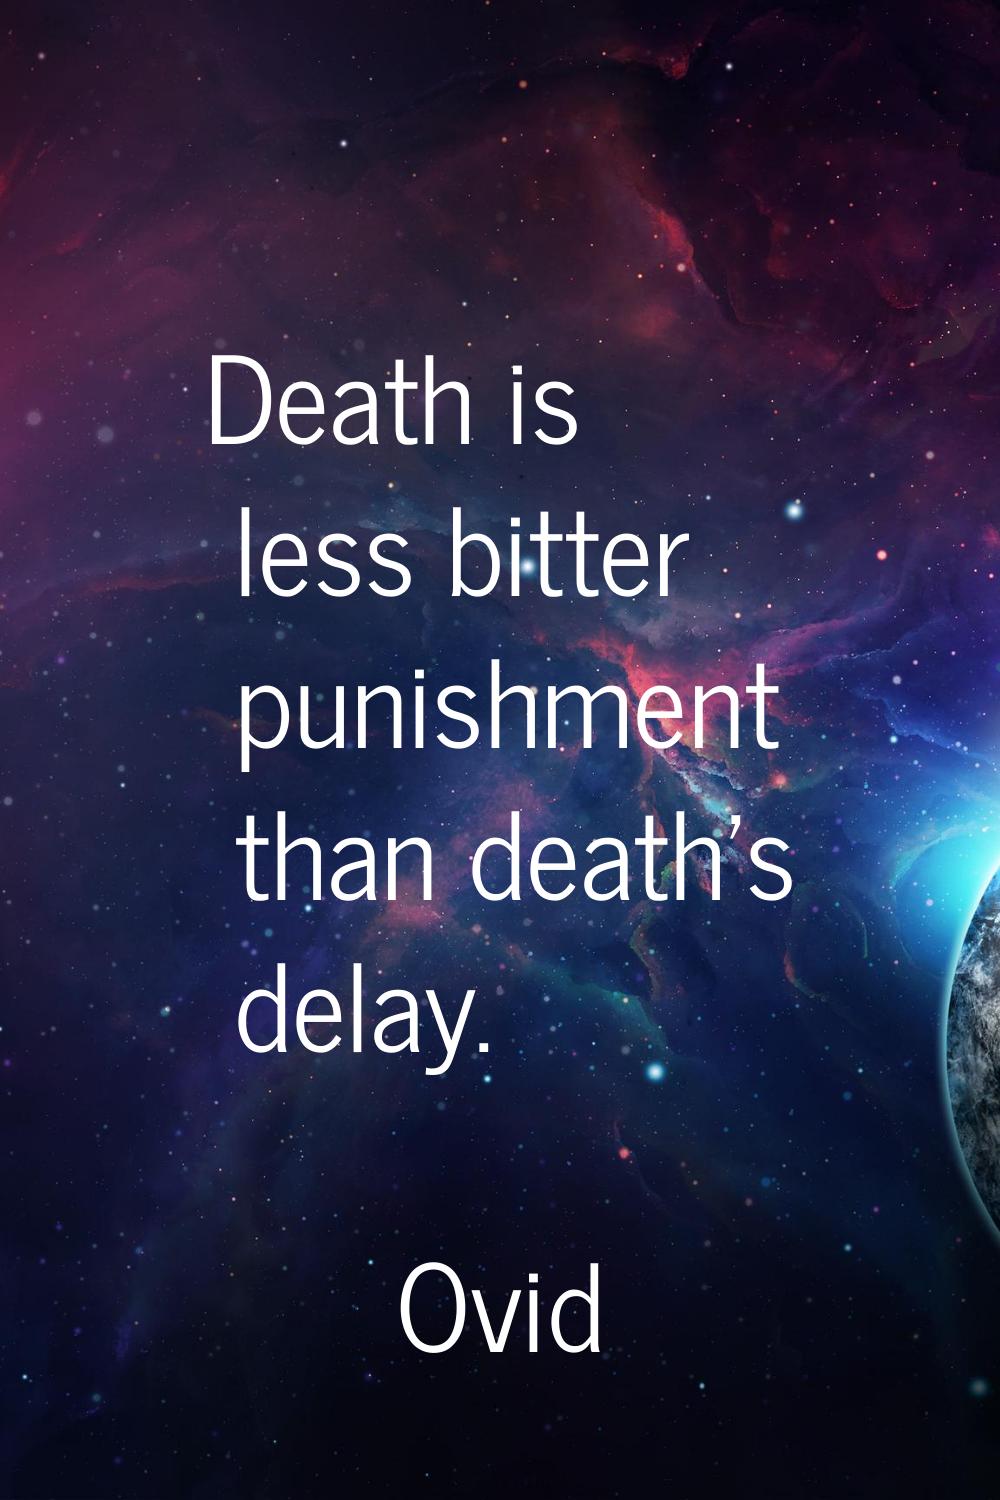 Death is less bitter punishment than death's delay.